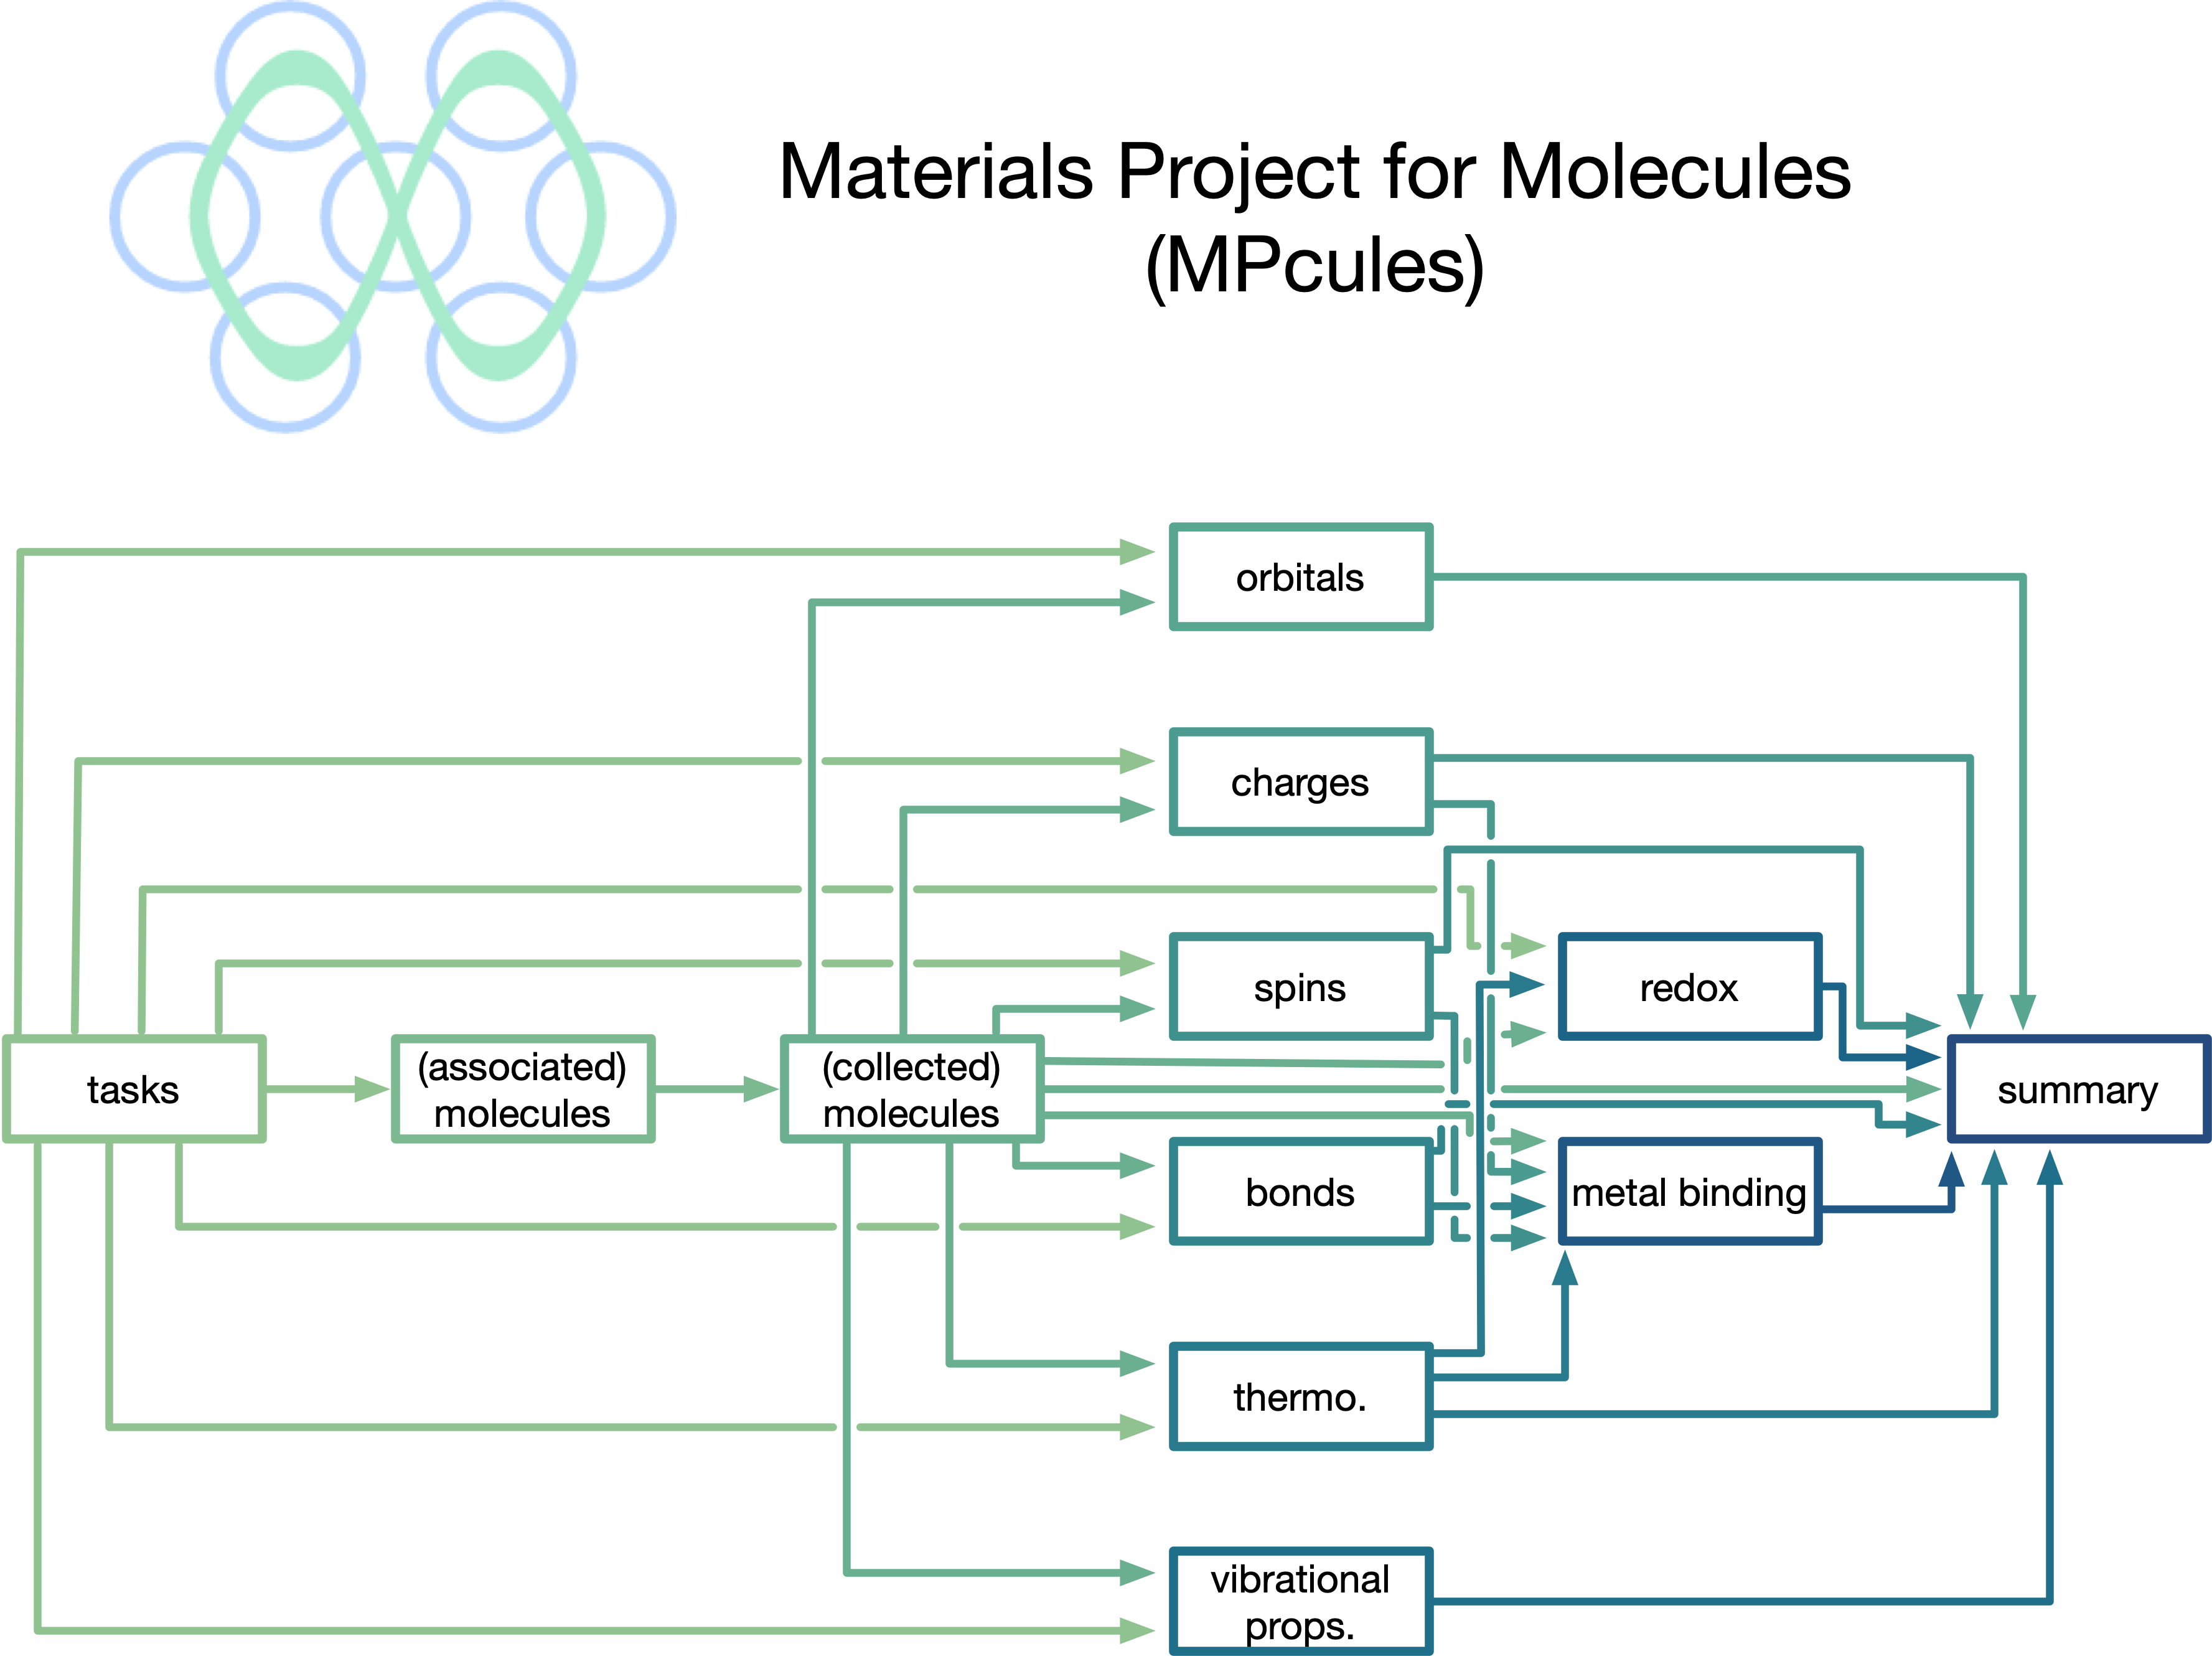 A flowchart showing how tasks (DFT calculations) are transformed to molecules and molecular properties in the Materials Project.